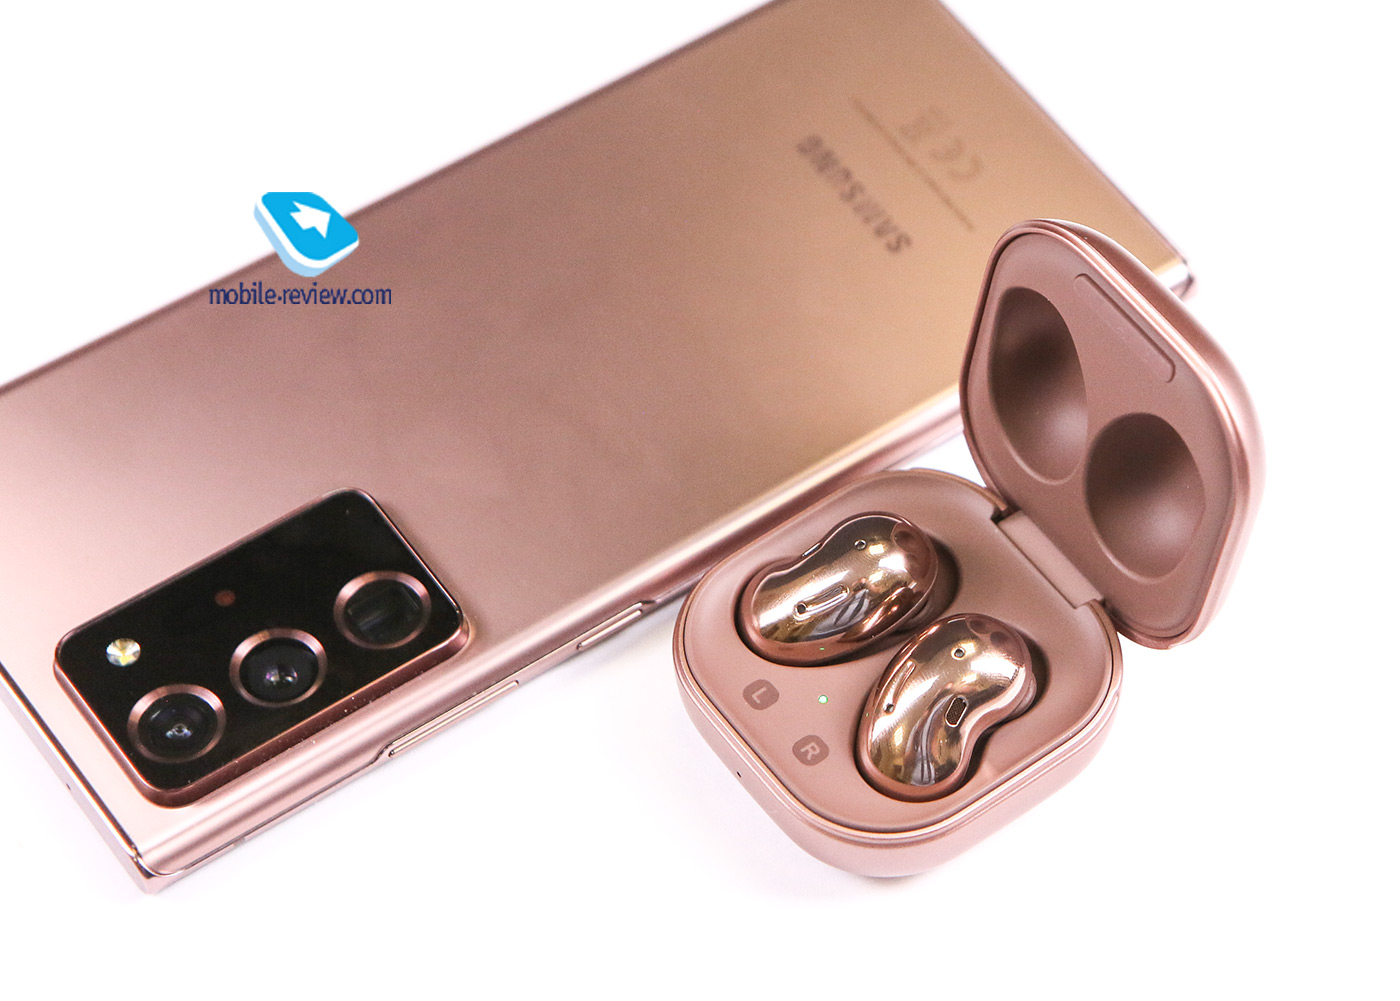 New flagships from Samsung Galaxy S21, S21 +, S21 Ultra and Buds Pro headphones